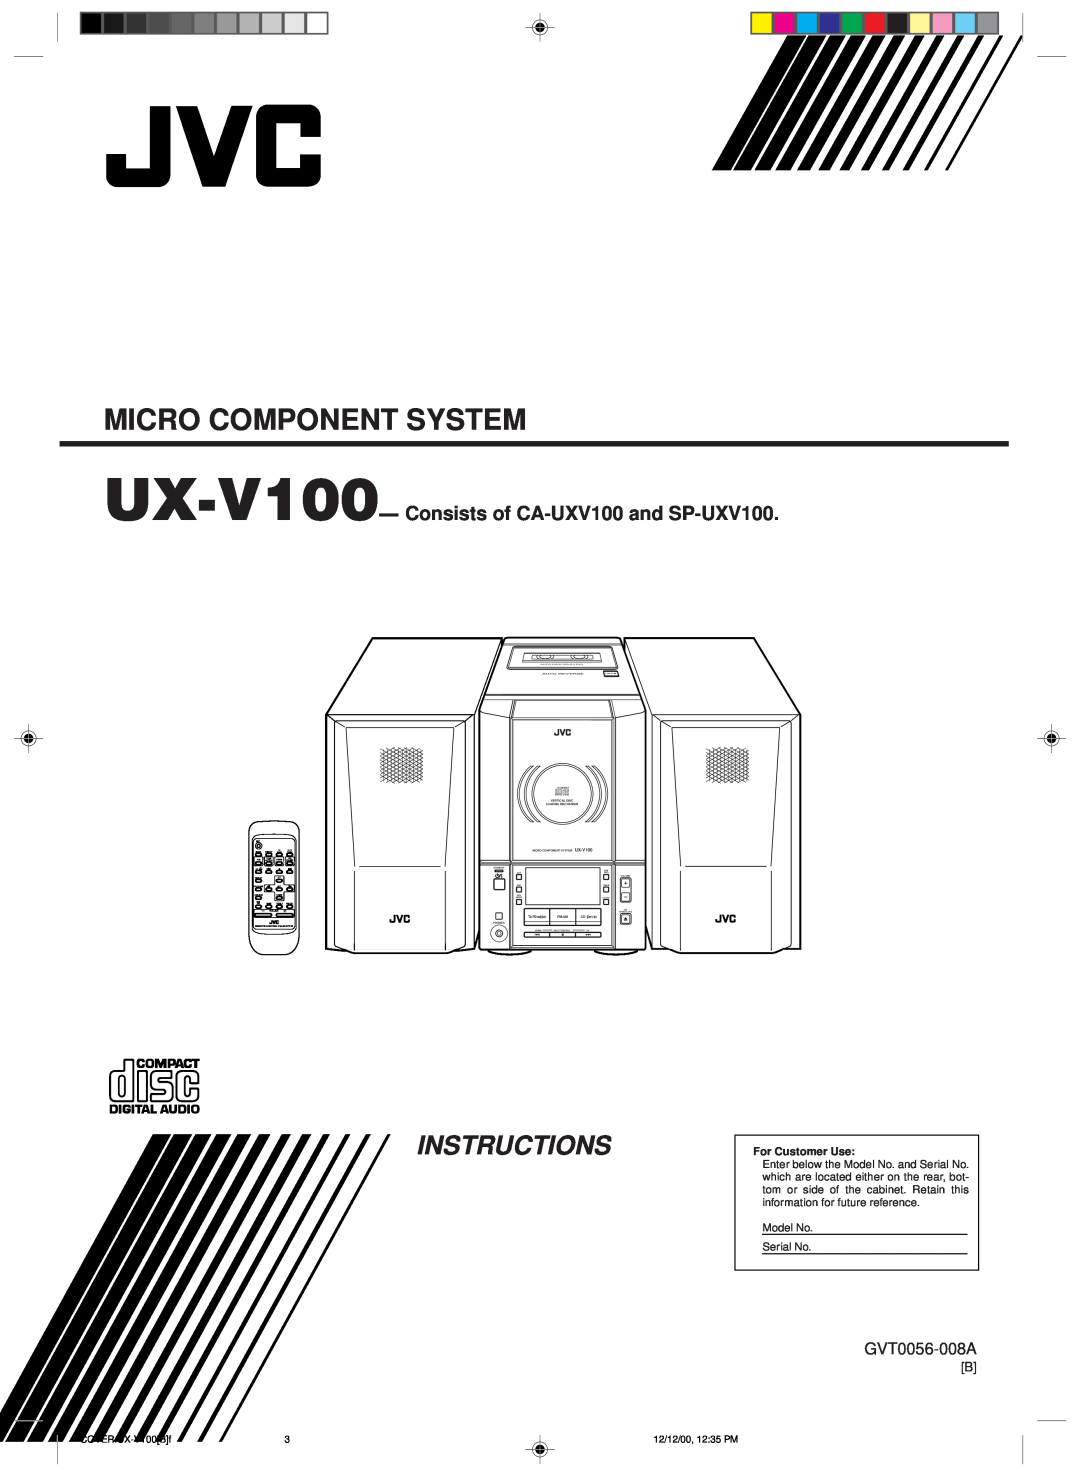 JVC manual UX-V100-Consists of CA-UXV100and SP-UXV100, Micro Component System, Instructions, GVT0056-008A, Tape, Fm/Am 